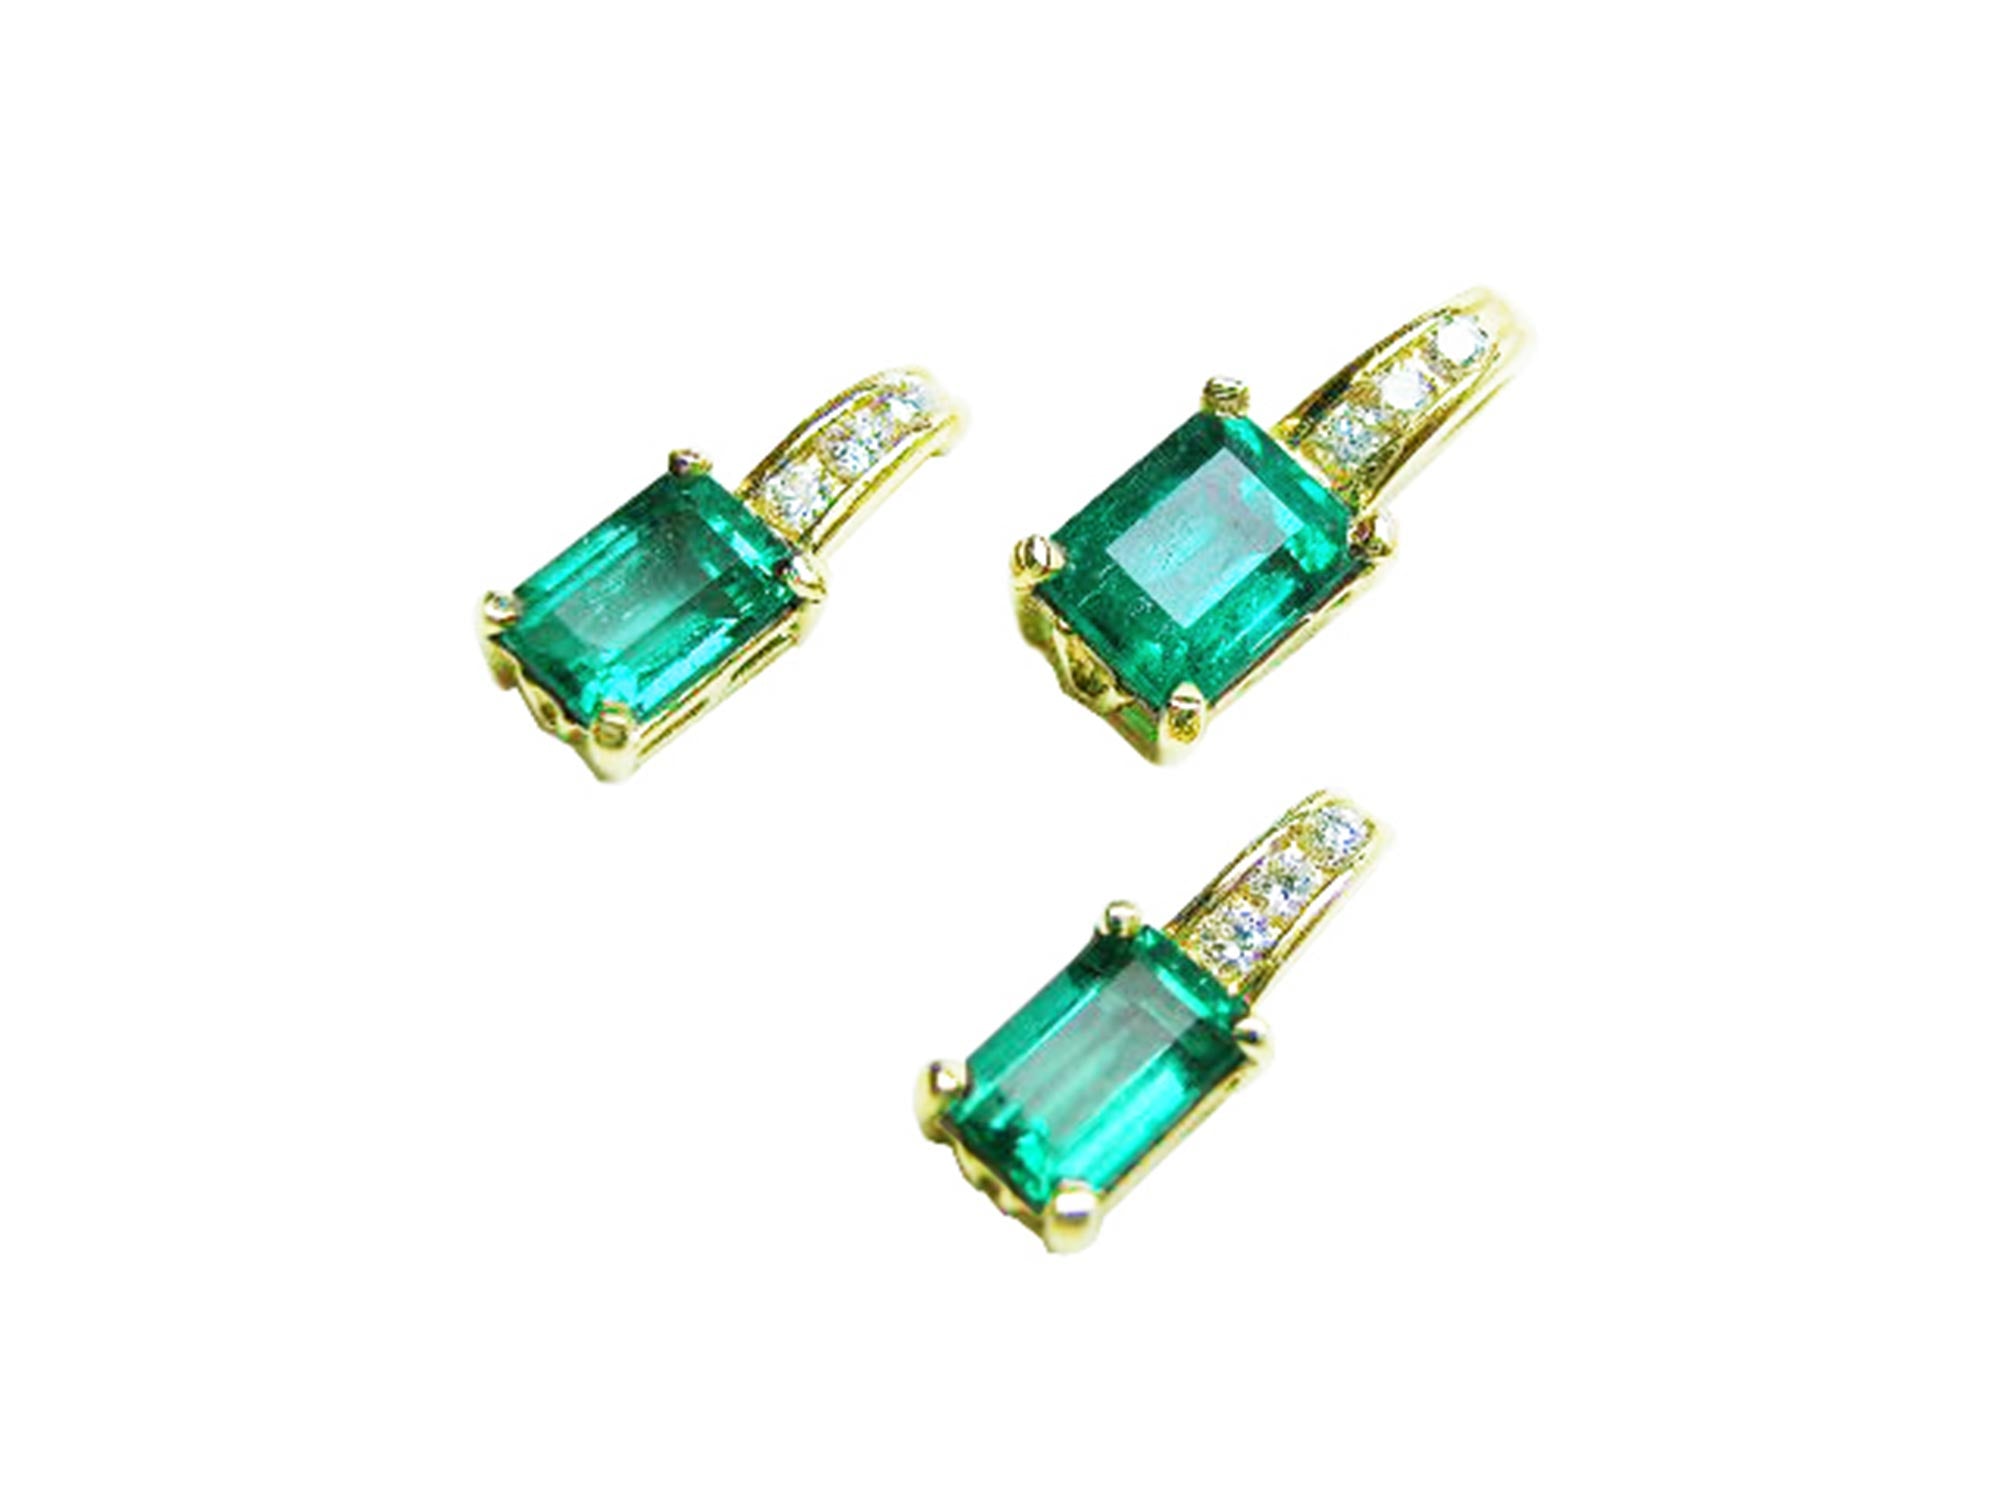 Mach emerald earrings and pendant